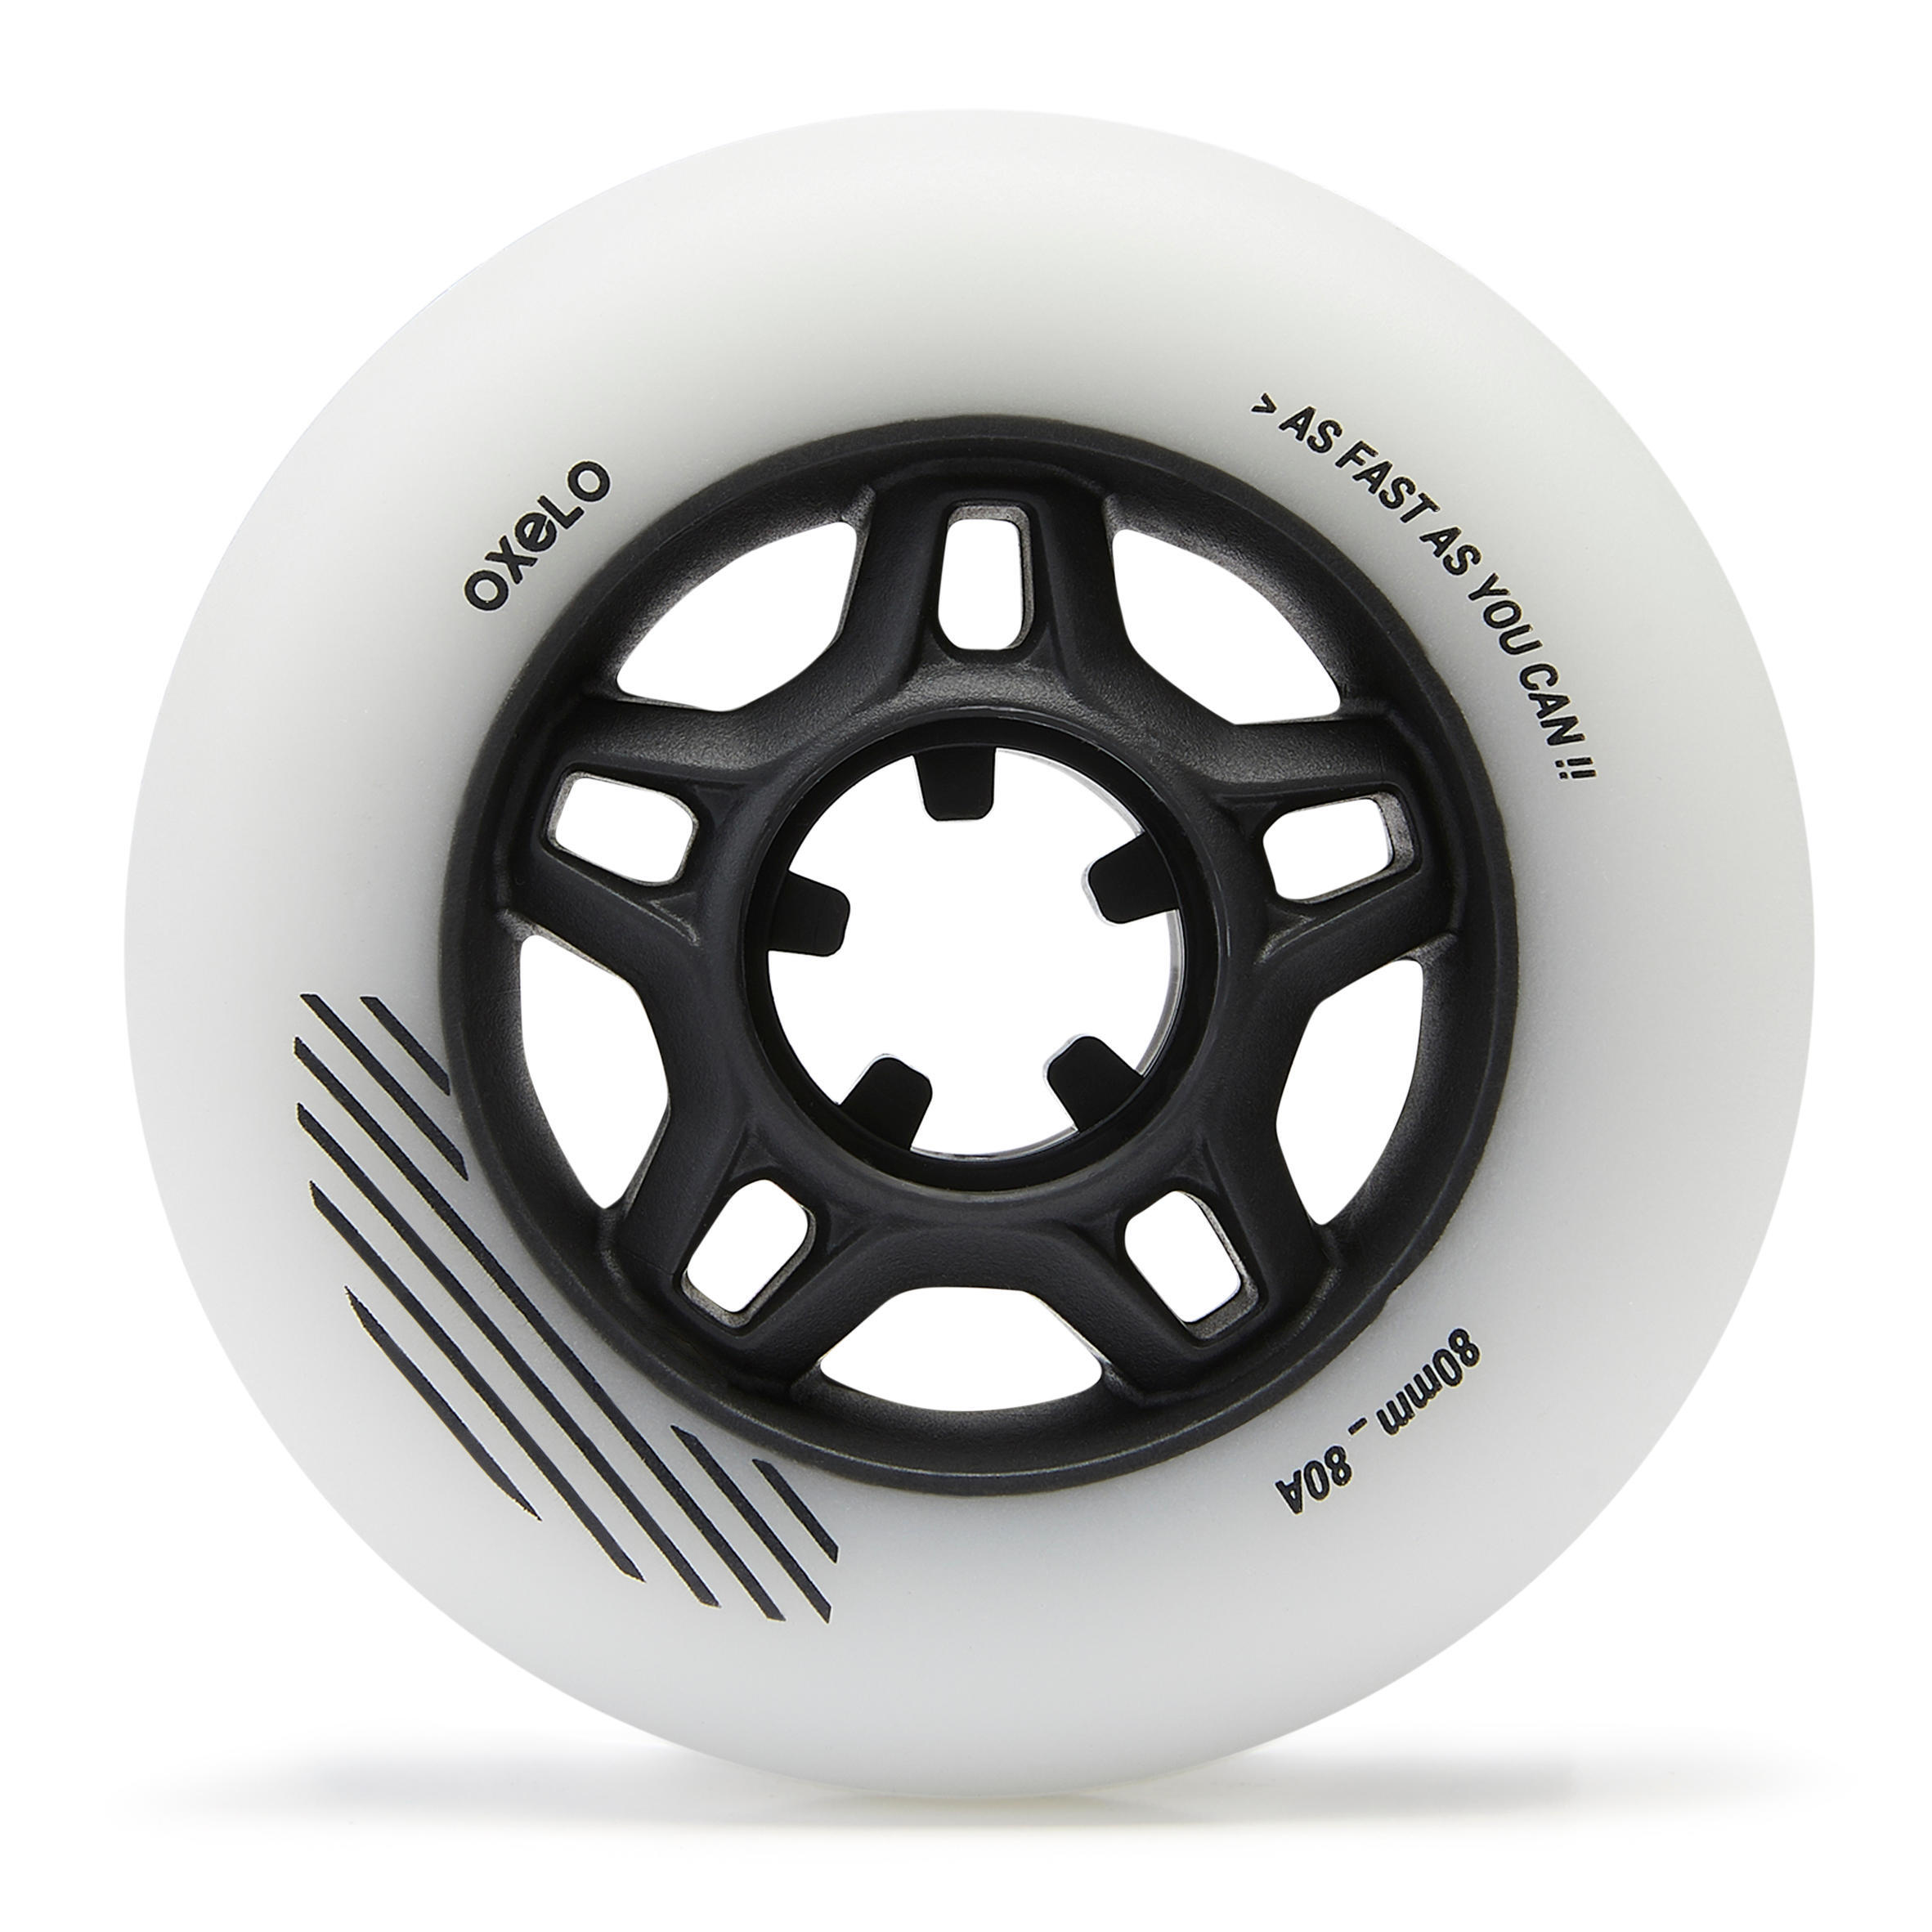 Adult 80mm 80A Fitness Inline Skating Wheels Fit 4-Pack - White 2/6